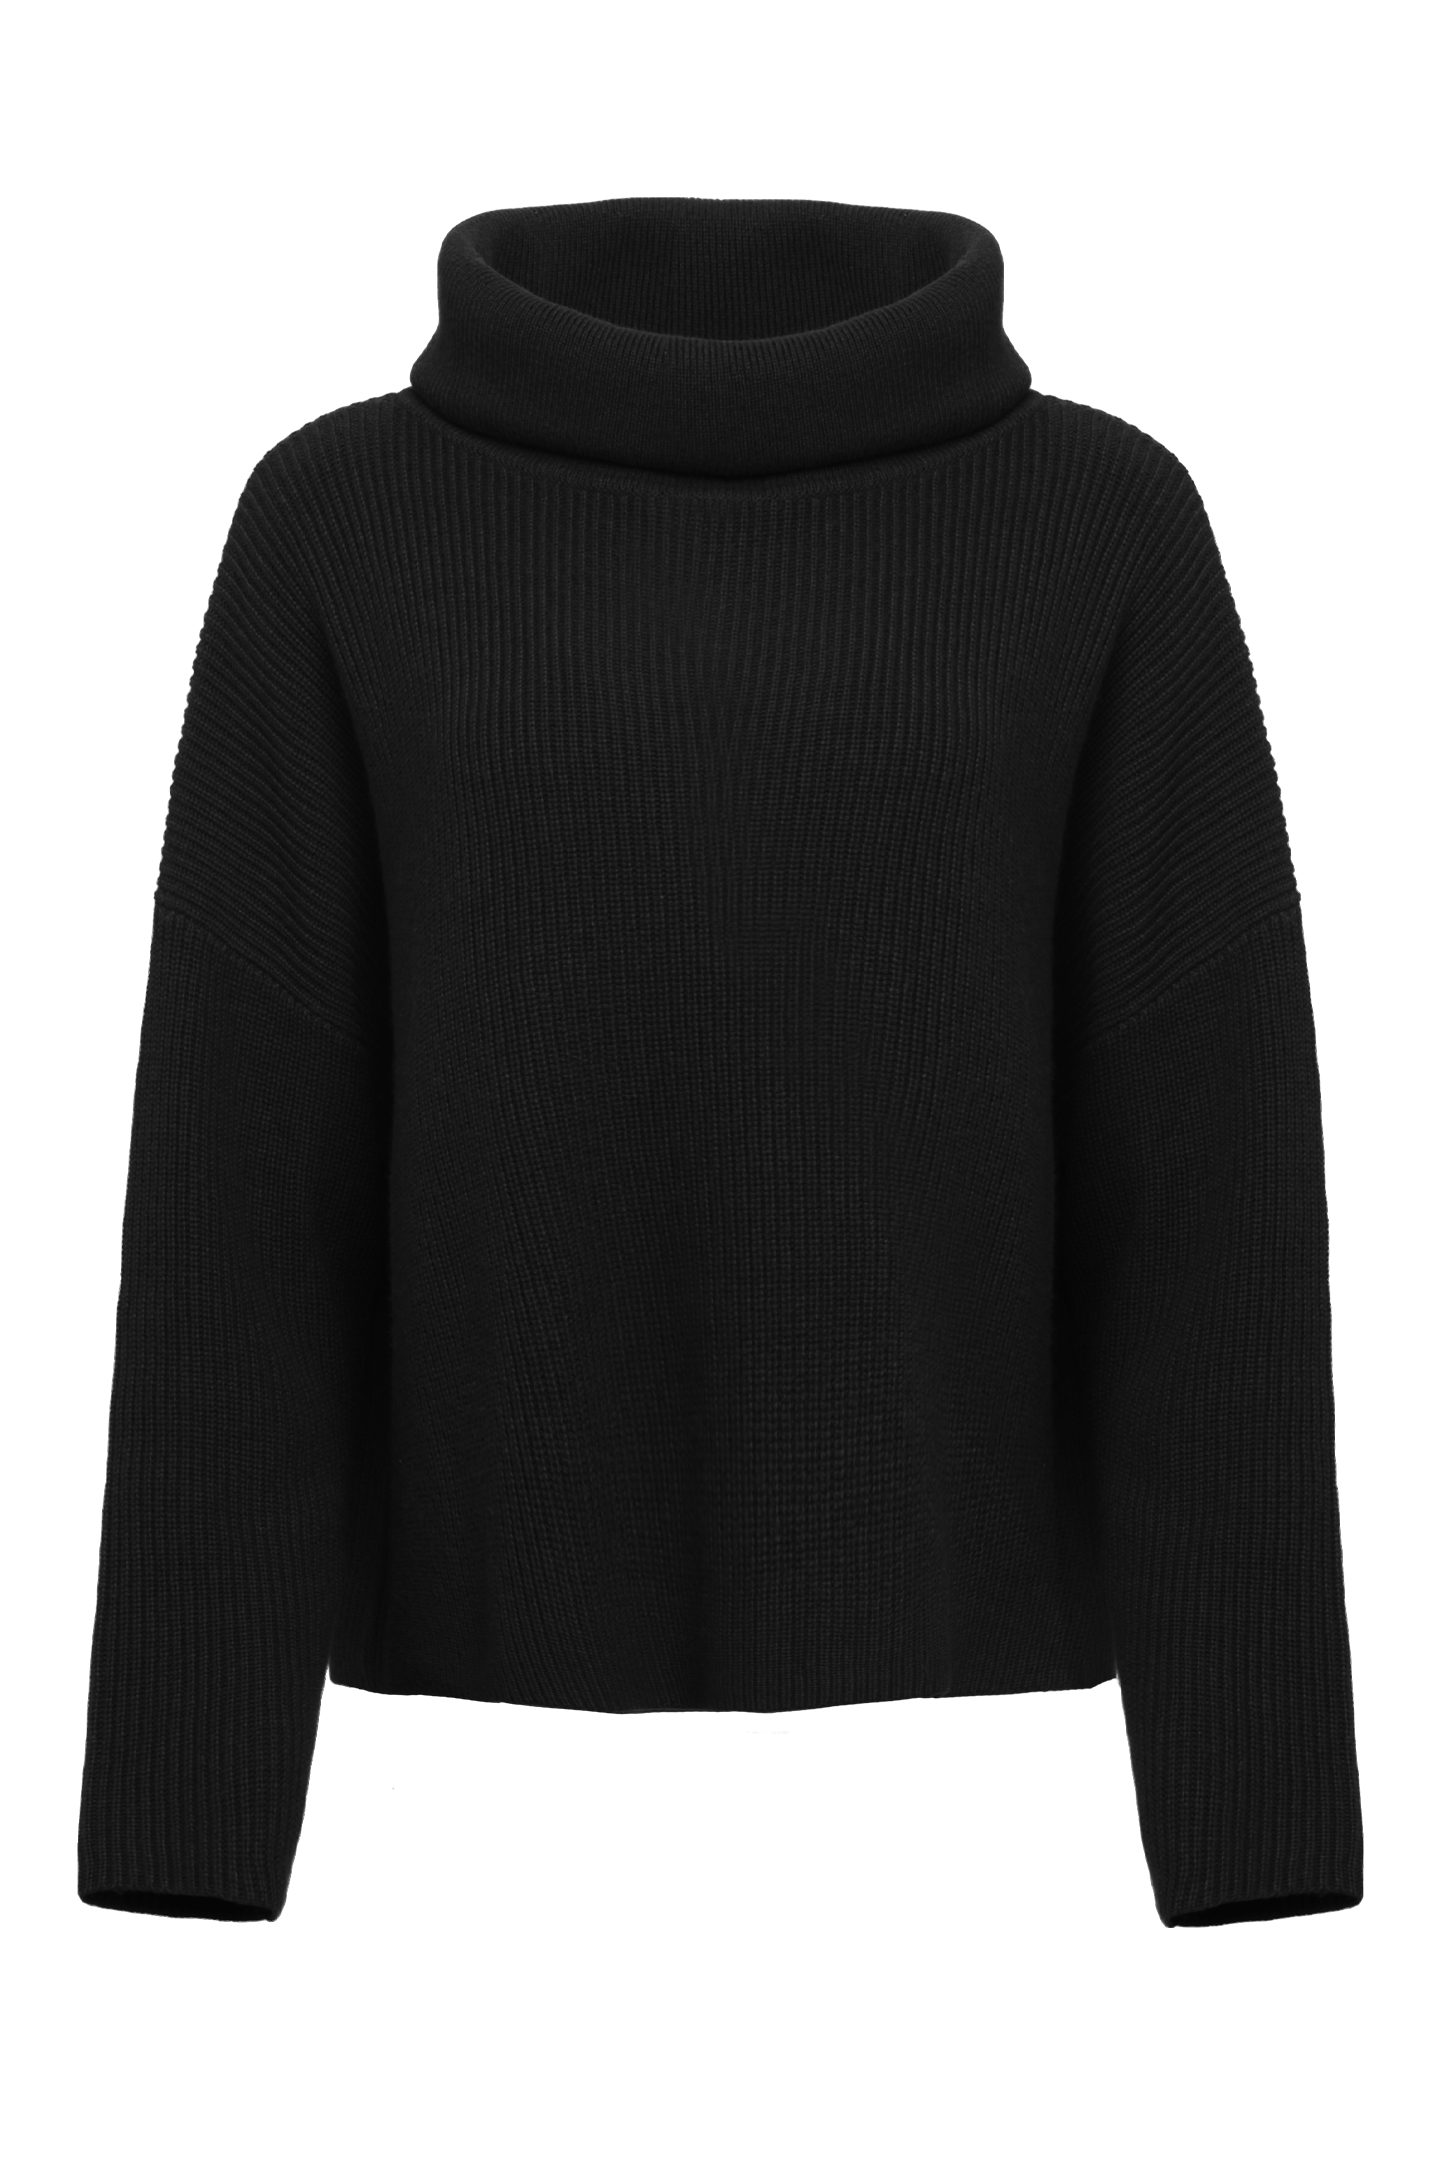 Buy ROLL NECK JUMPER online at Intimo